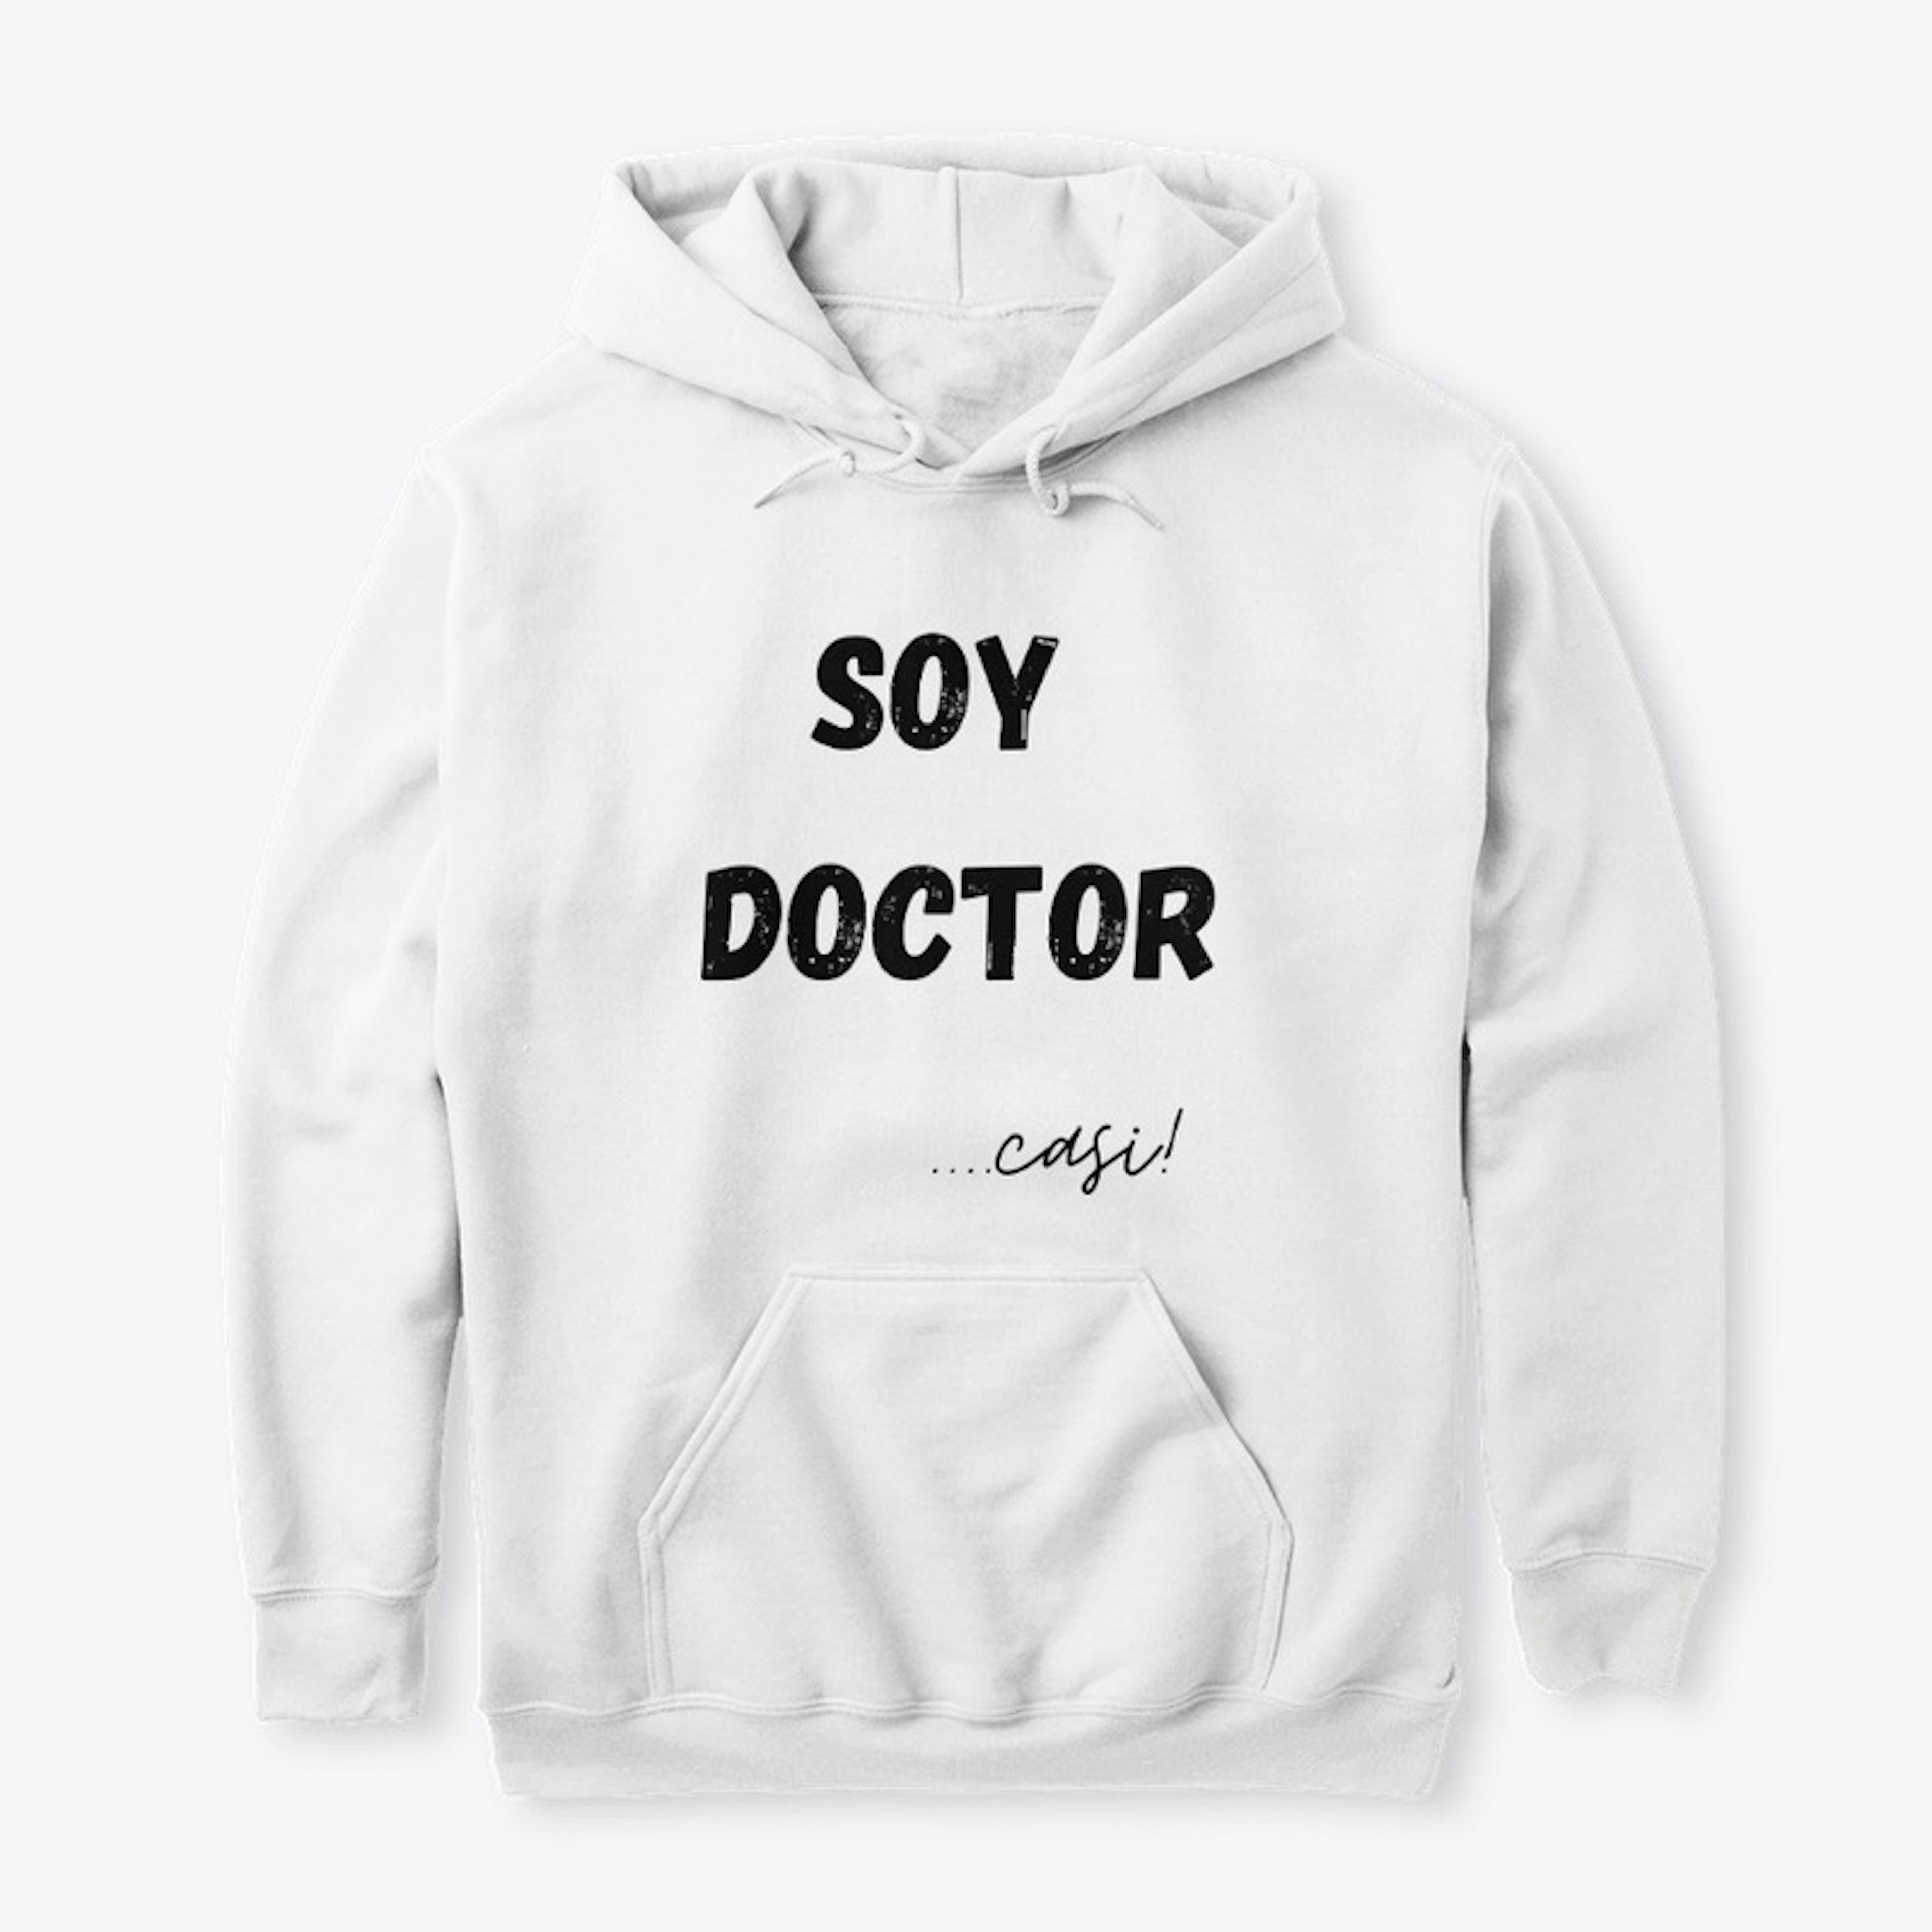 Soy Doctor... casi!